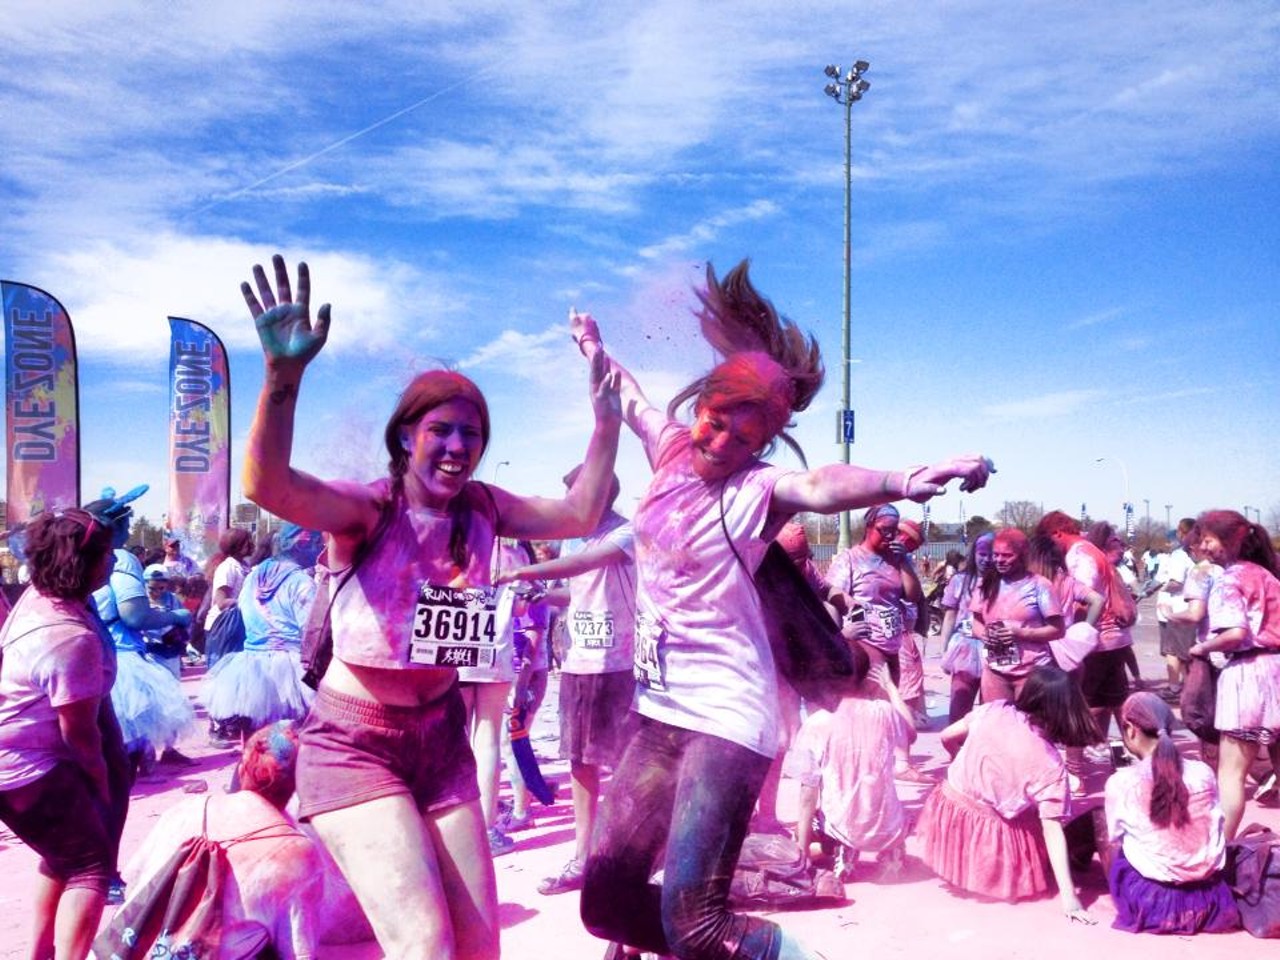 Dubbed Run or Dye, this popular race features five dyeing stations along the route of the 5K that winds through downtown Cleveland. At each stop, runners get blasted by a cornstarch dye (it’s all eco friendly and plant based) so they end up becoming a veritable canvas by the end of the race. Registration costs $57 per person (discounts are available for teams) and the money goes toward Susan G. Komen Northeast Ohio, a breast health resource. Find more information on the race’s website. The race starts at 9 a.m. (Niesel)